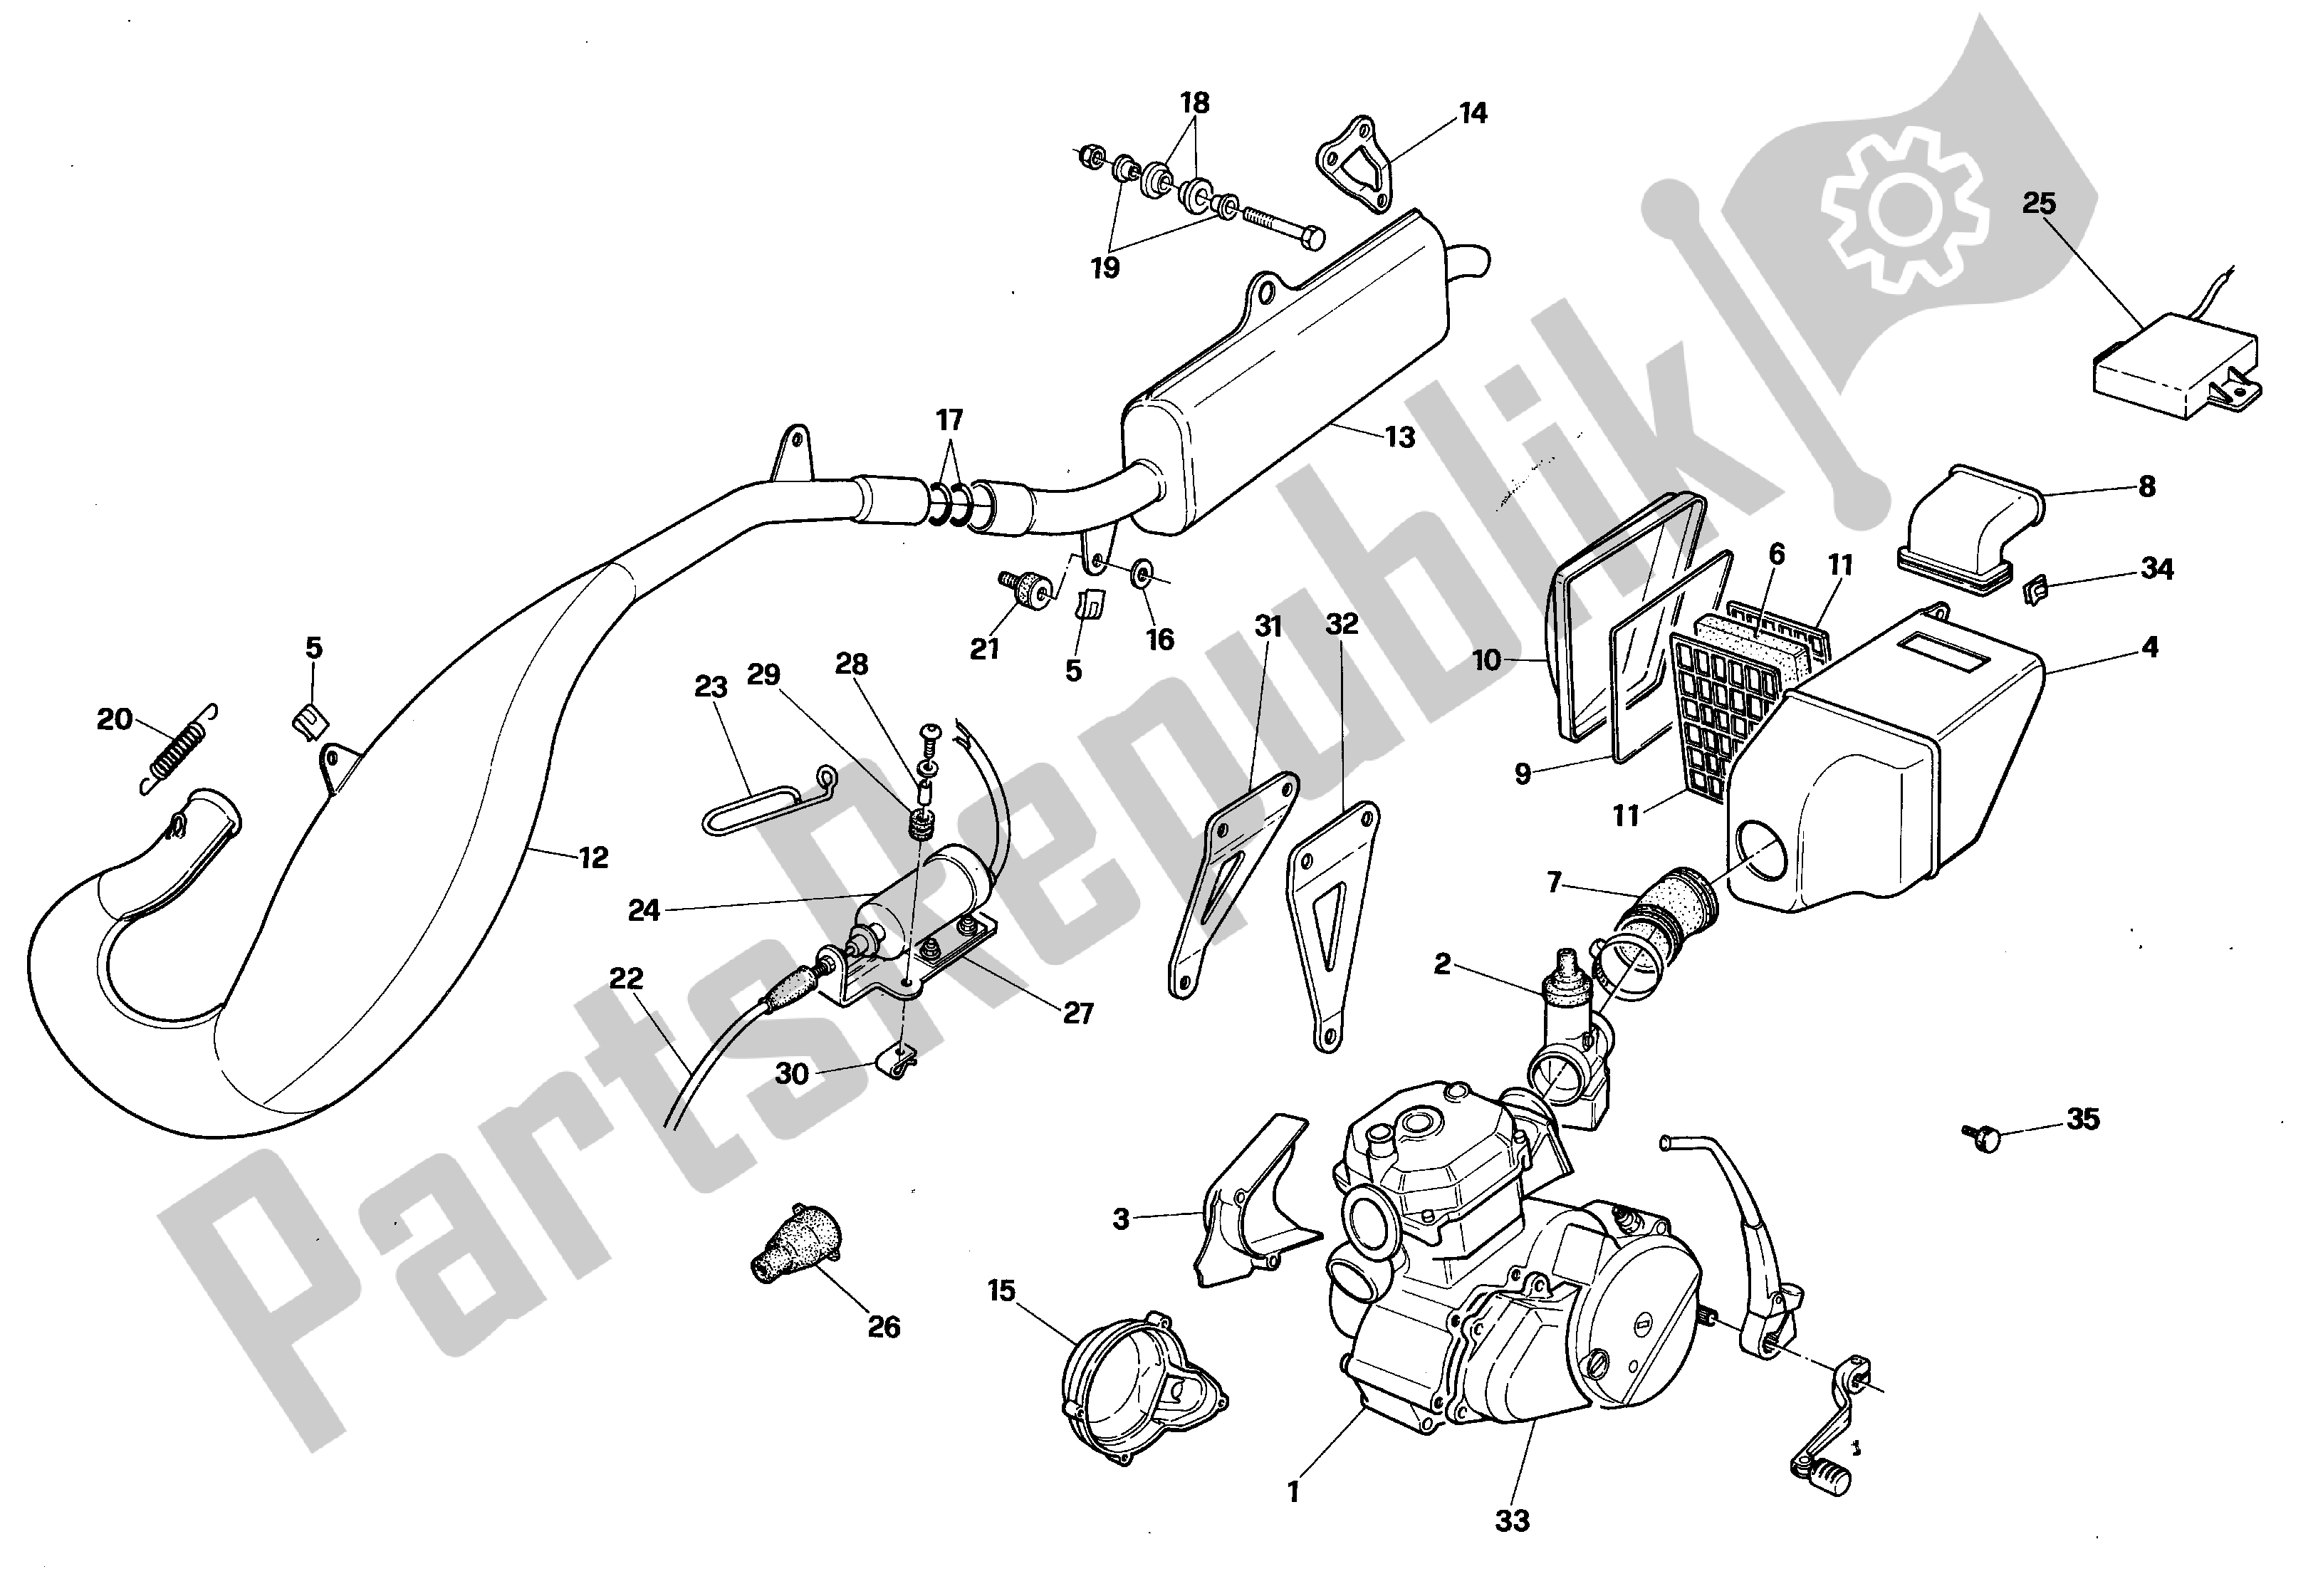 All parts for the Exhaust Assembly of the Aprilia Tuareg 125 1989 - 1992